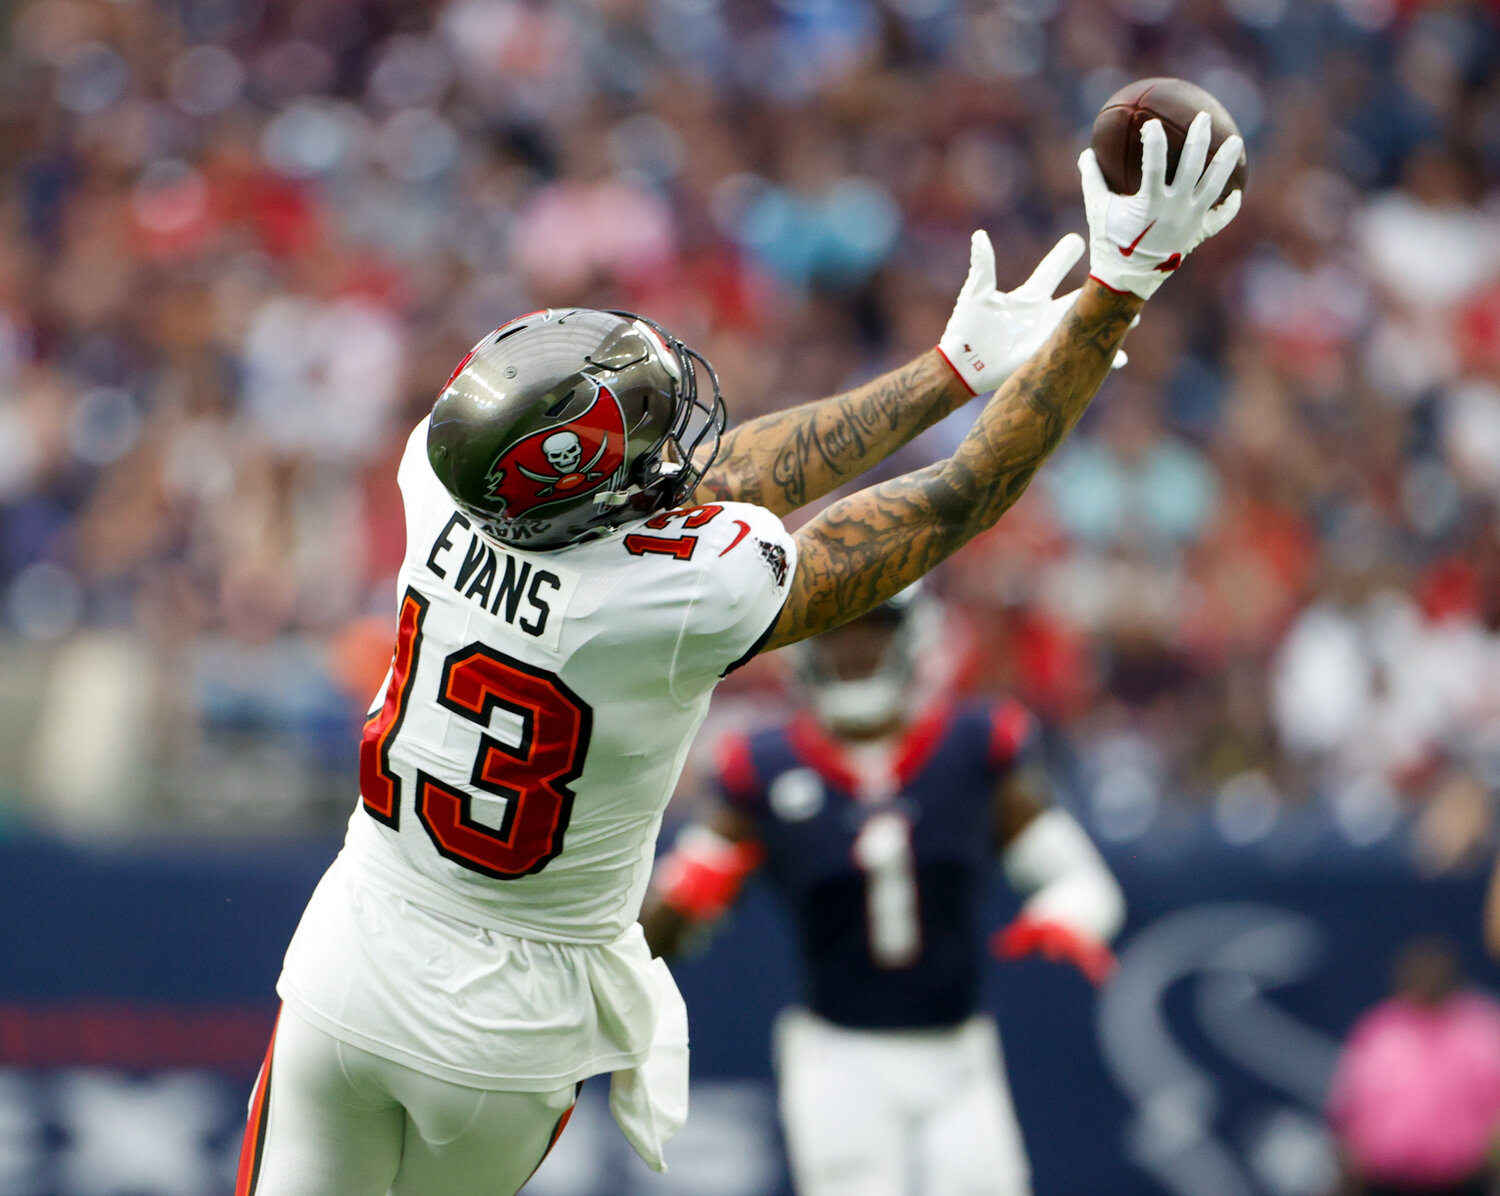 Buccaneers wide receiver Mike Evans (13) makes a catch during an NFL game between the Houston Texans and the Tampa Bay Buccaneers on November 5, 2023 in Houston.